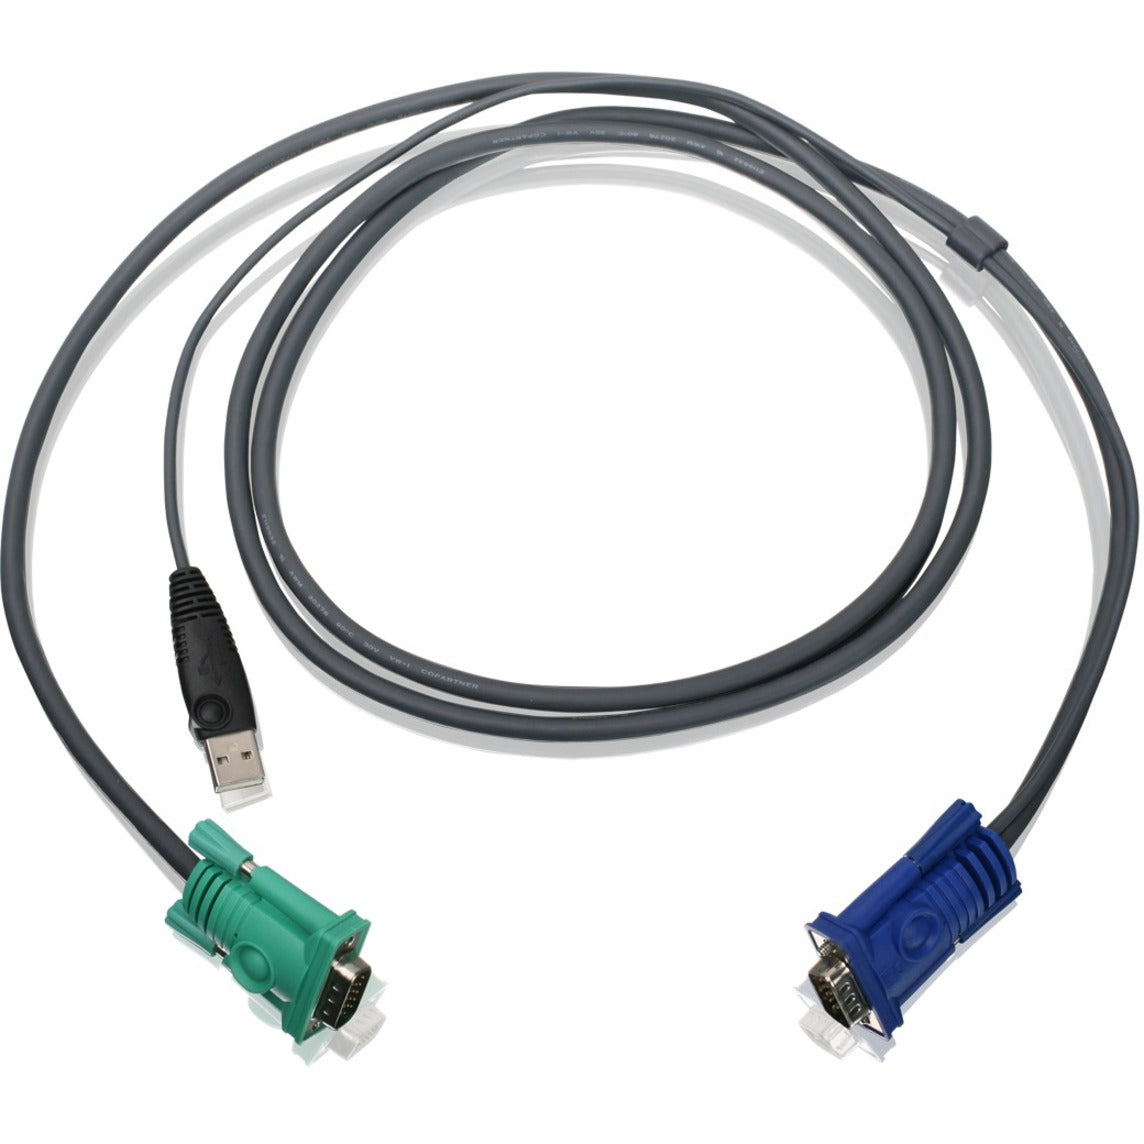 IOGEAR G2L5202U USB KVM Cable 6 Ft, Copper Conductor, 2-way, Keyboard/Mouse, Computer, KVM Switch